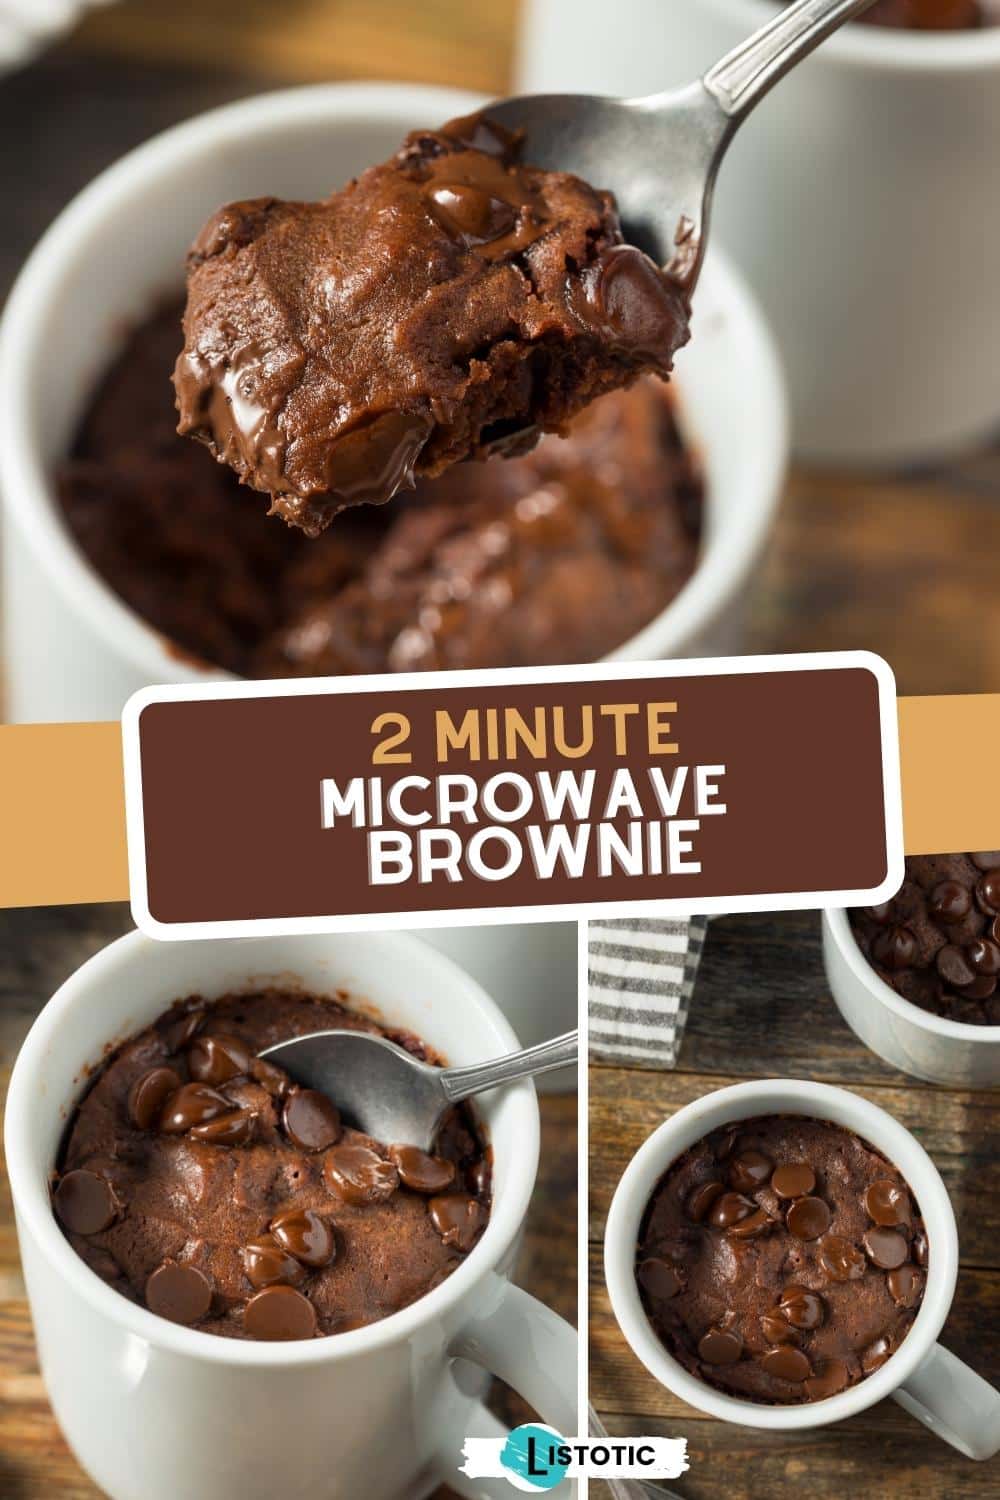 2 minute microwave brownie in a mug for one person